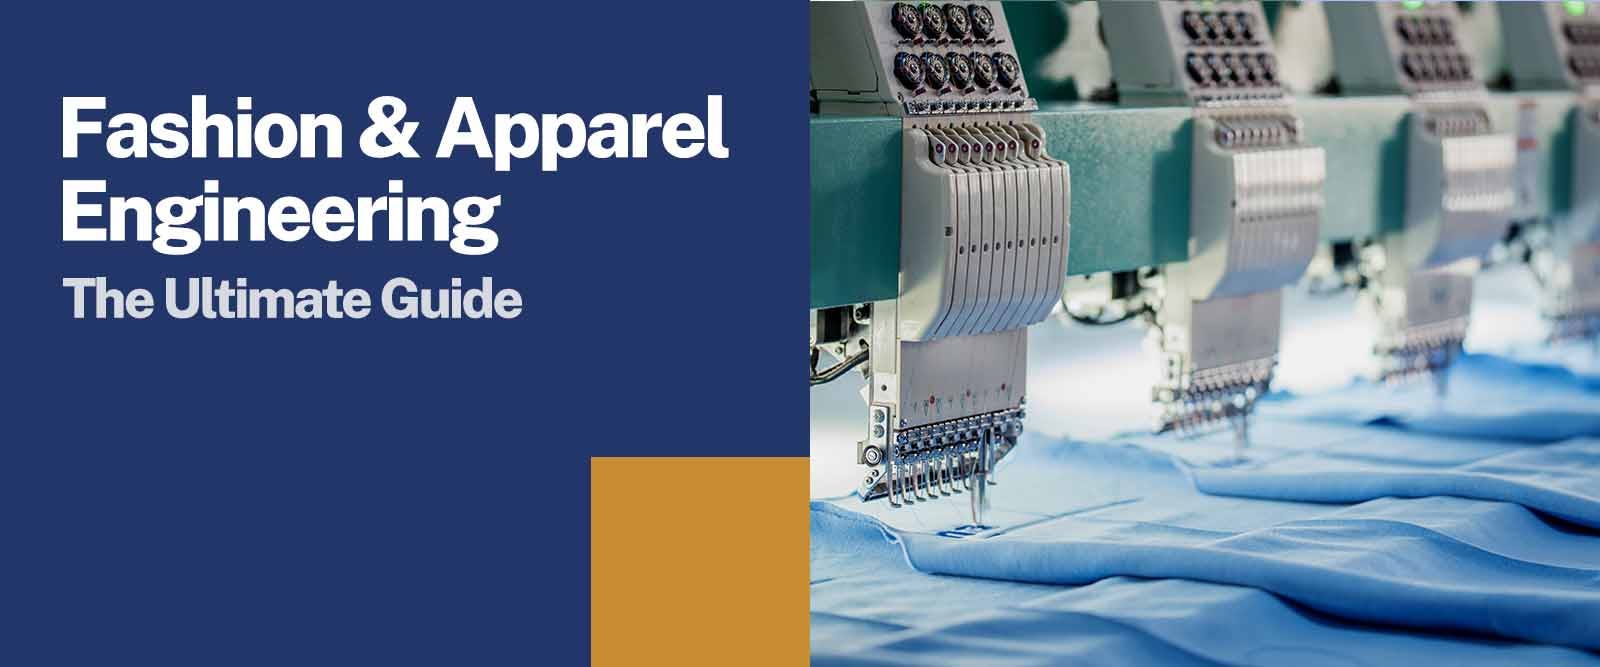 Fashion & Apparel Engineering The Ultimate Guide